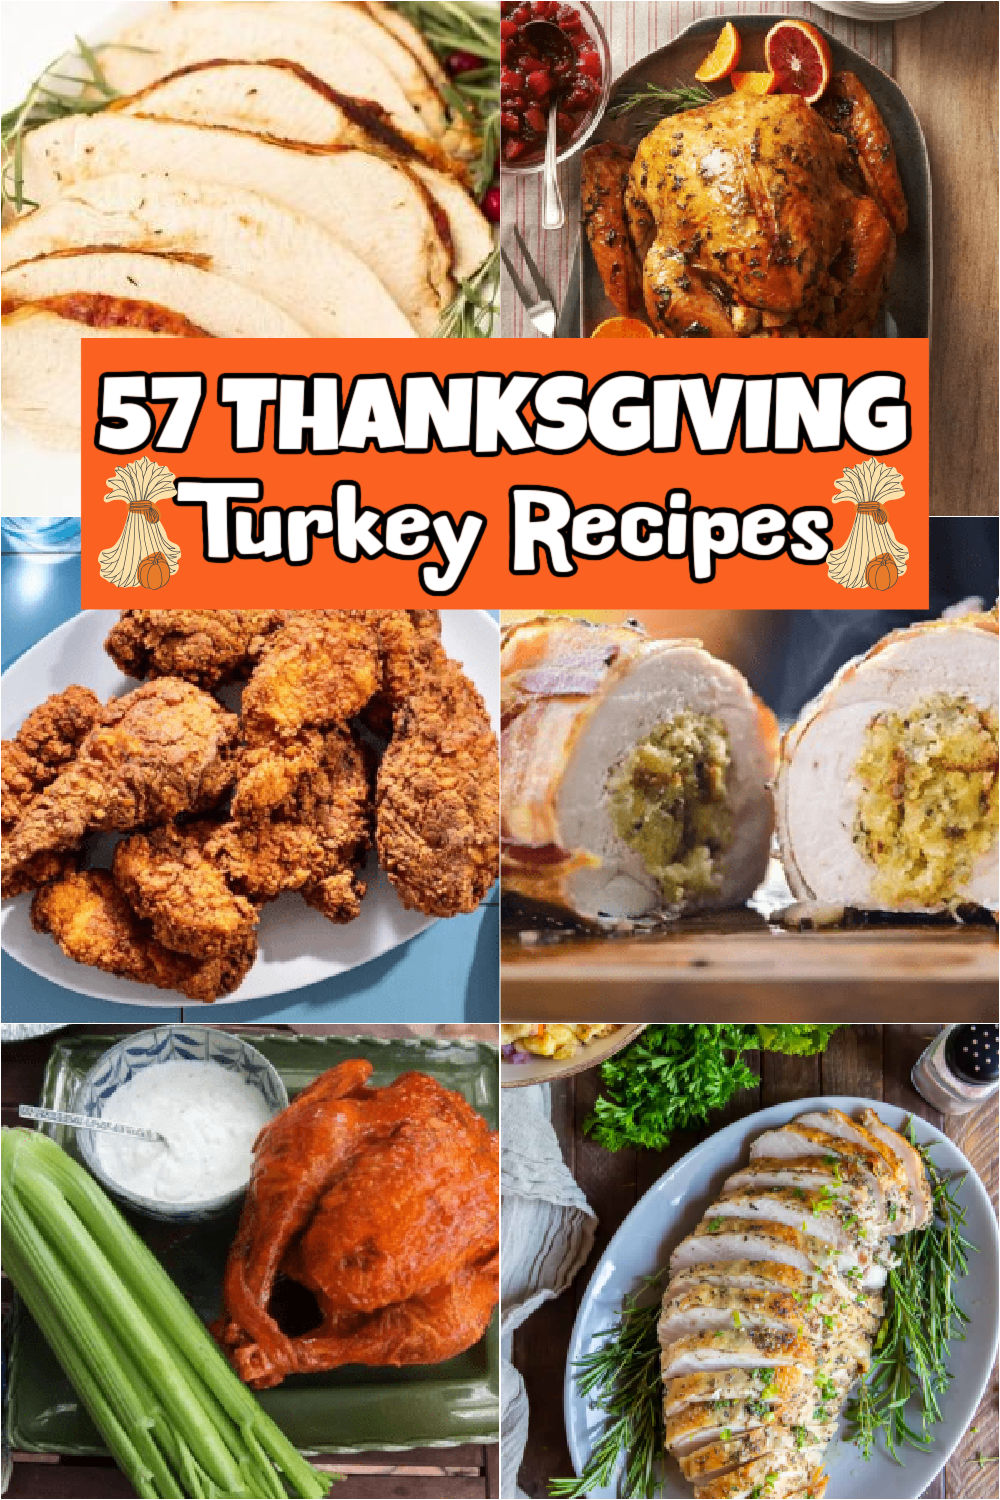 Get ready for the best Thanksgiving turkey recipes. From crispy skin to juicy meat, impress your guests with 57 must-try best turkey recipes for Thanksgiving menus. Easy ideas include recipes for the oven, air fryer, instant pot and more. #eatingonatime #thanksgivingturkeyrecipes #thanksgivingrecipes